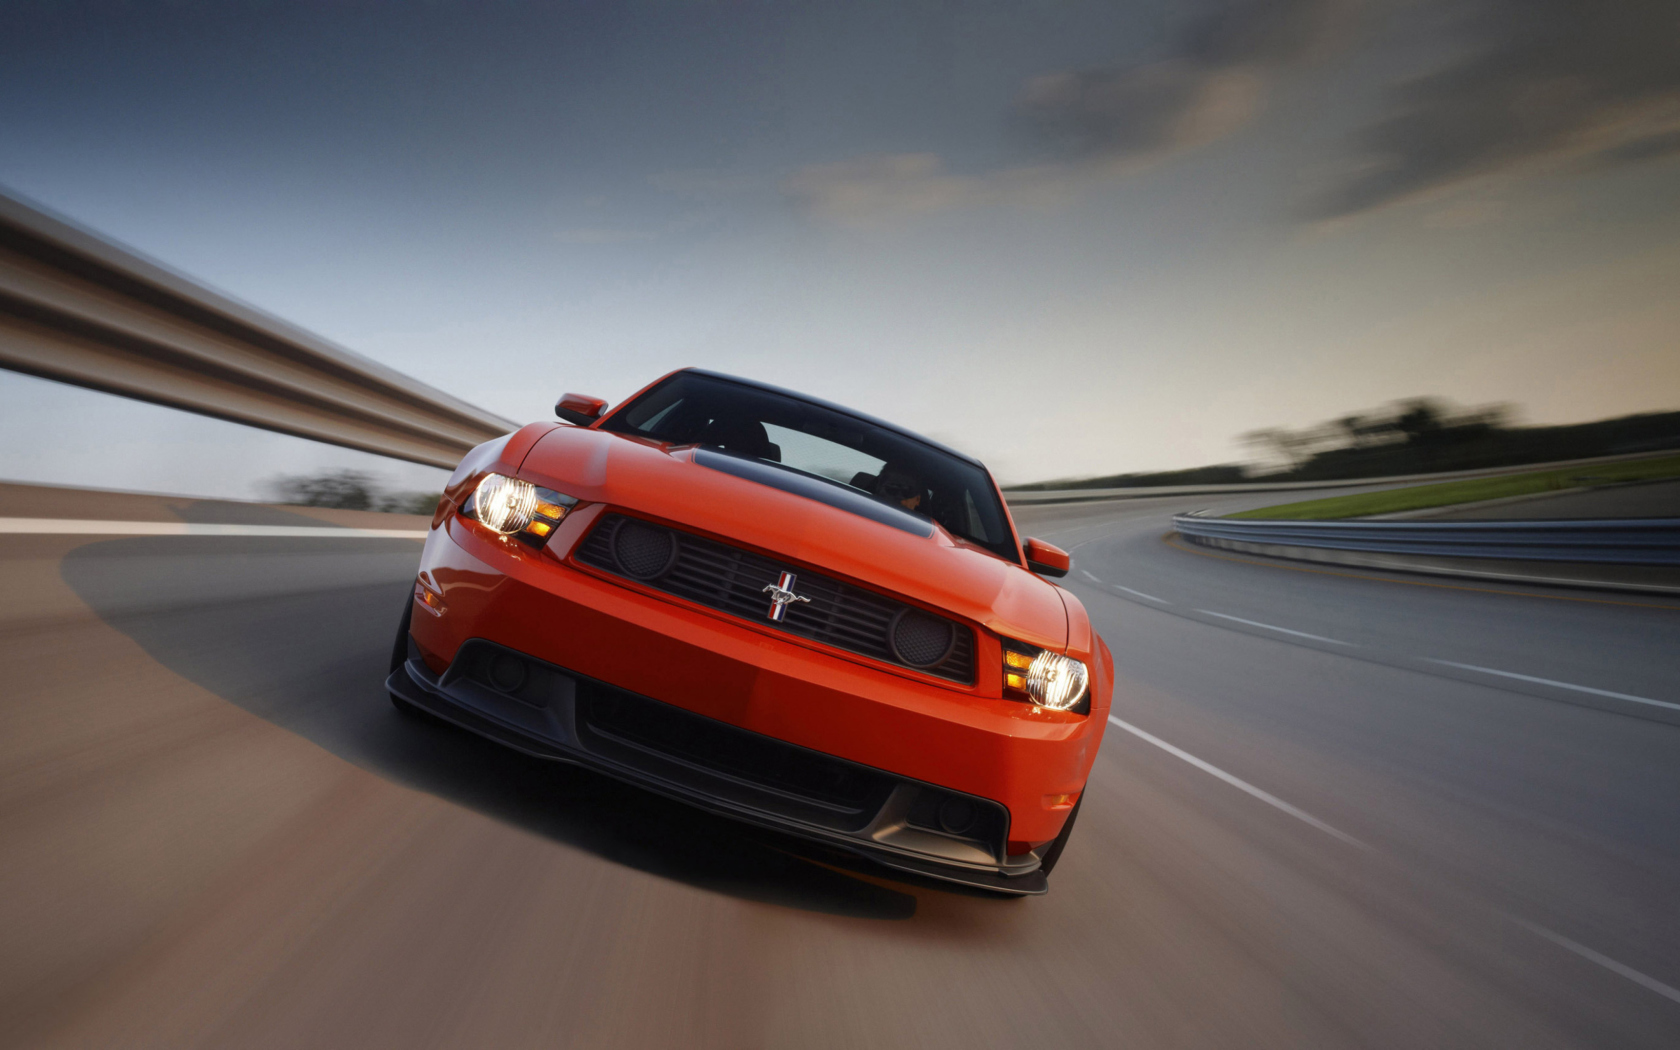 Red Cars Ford Mustang wallpaper 1680x1050